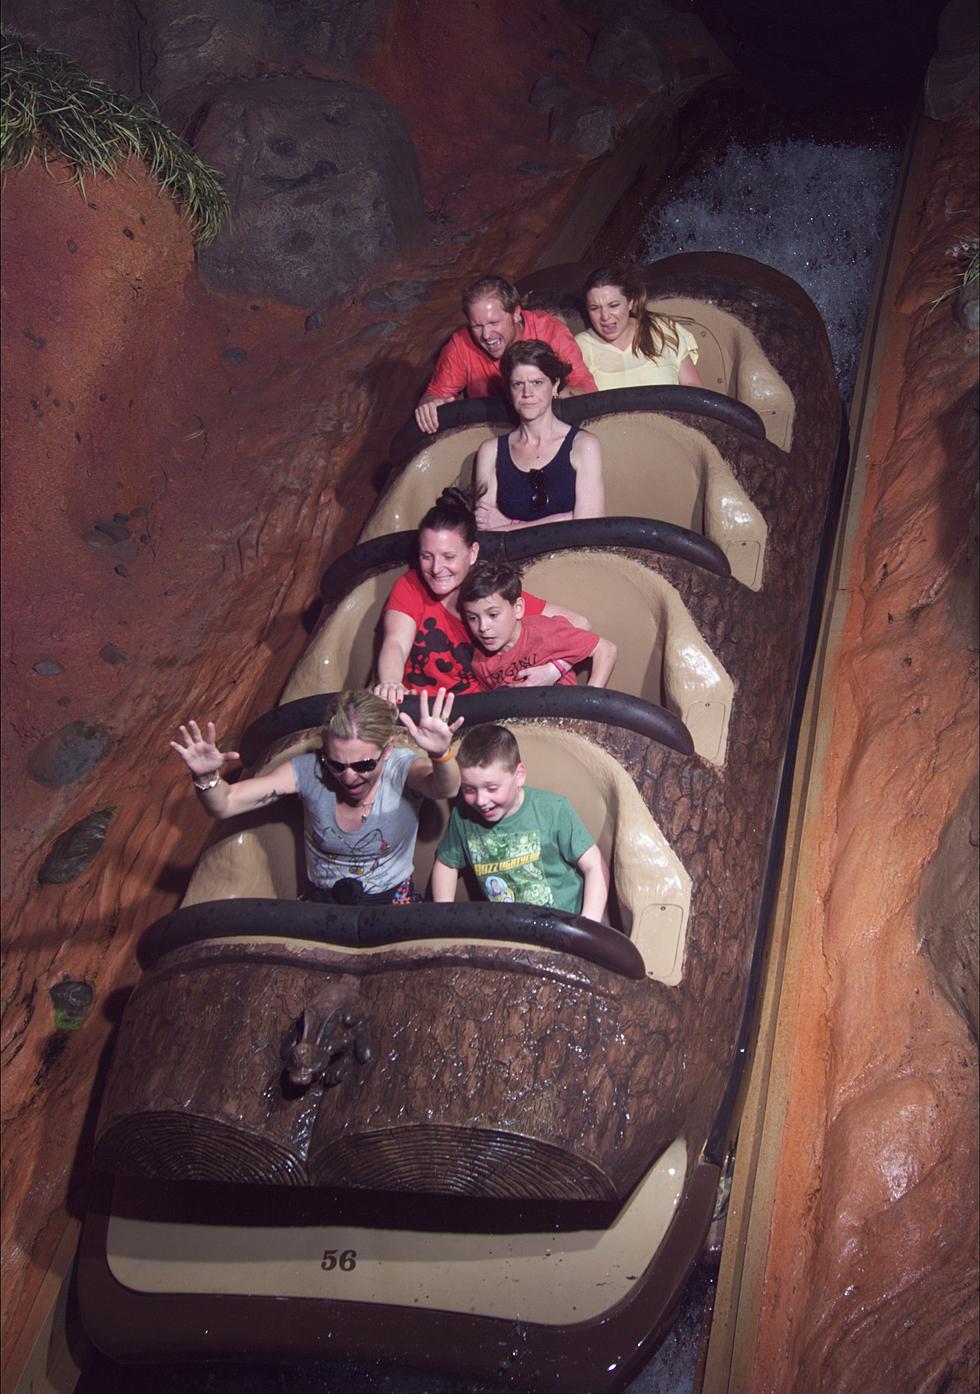 Angry Woman on Splash Mountain Could Be Your New Favorite Meme